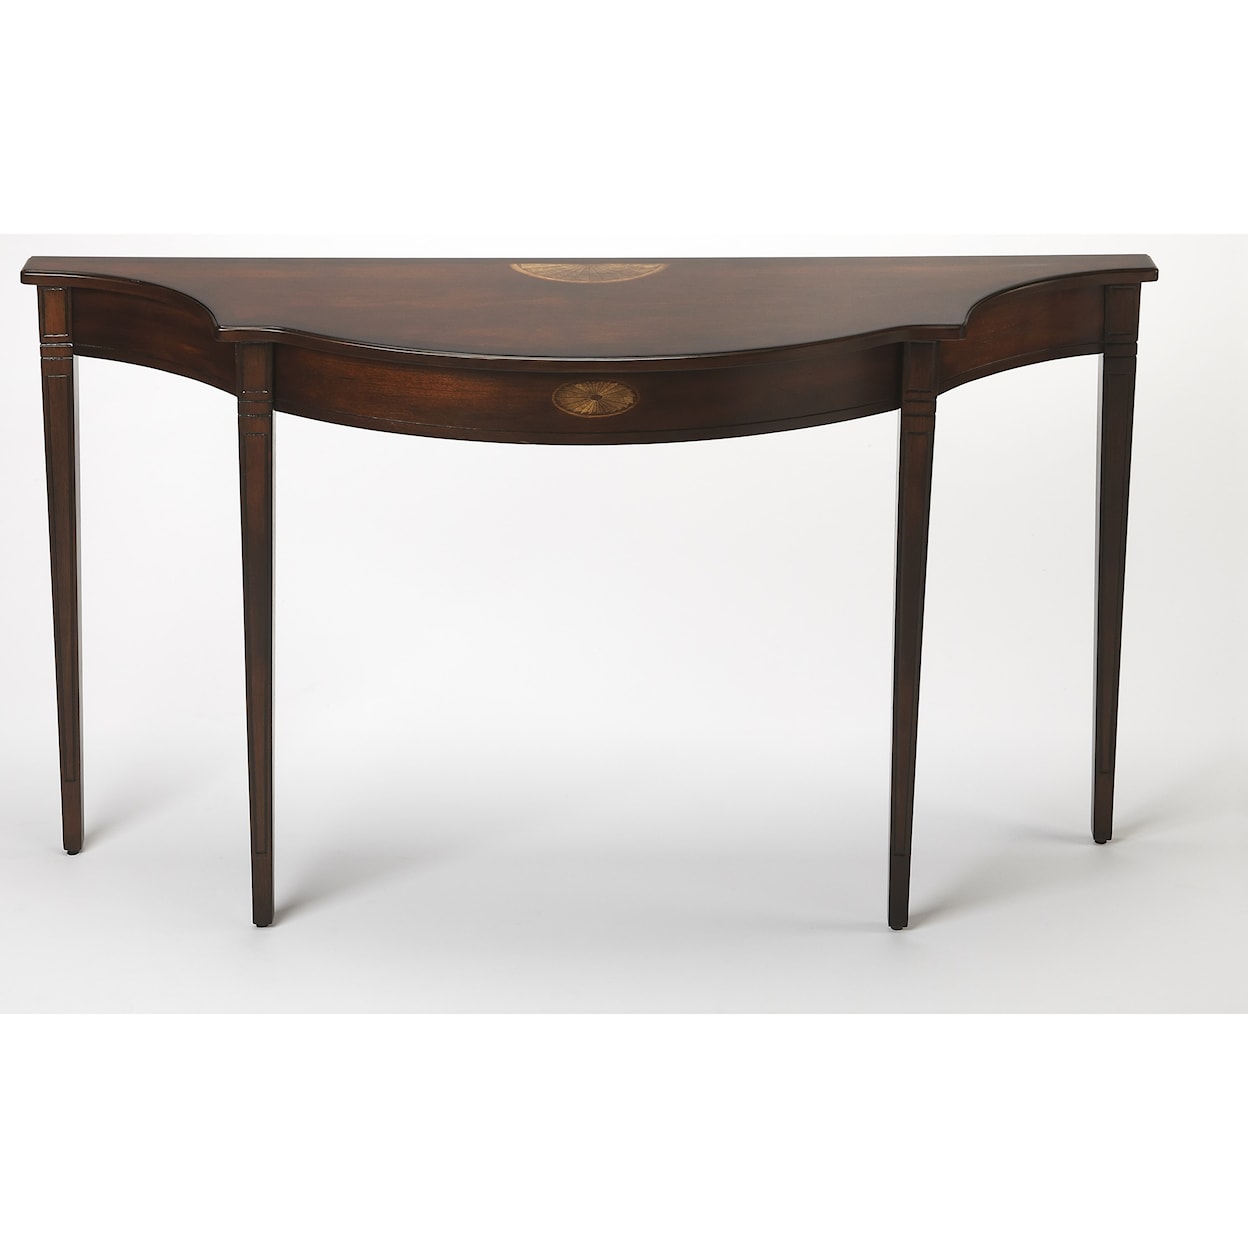 Butler Specialty Company Plantation Cherry Console Table